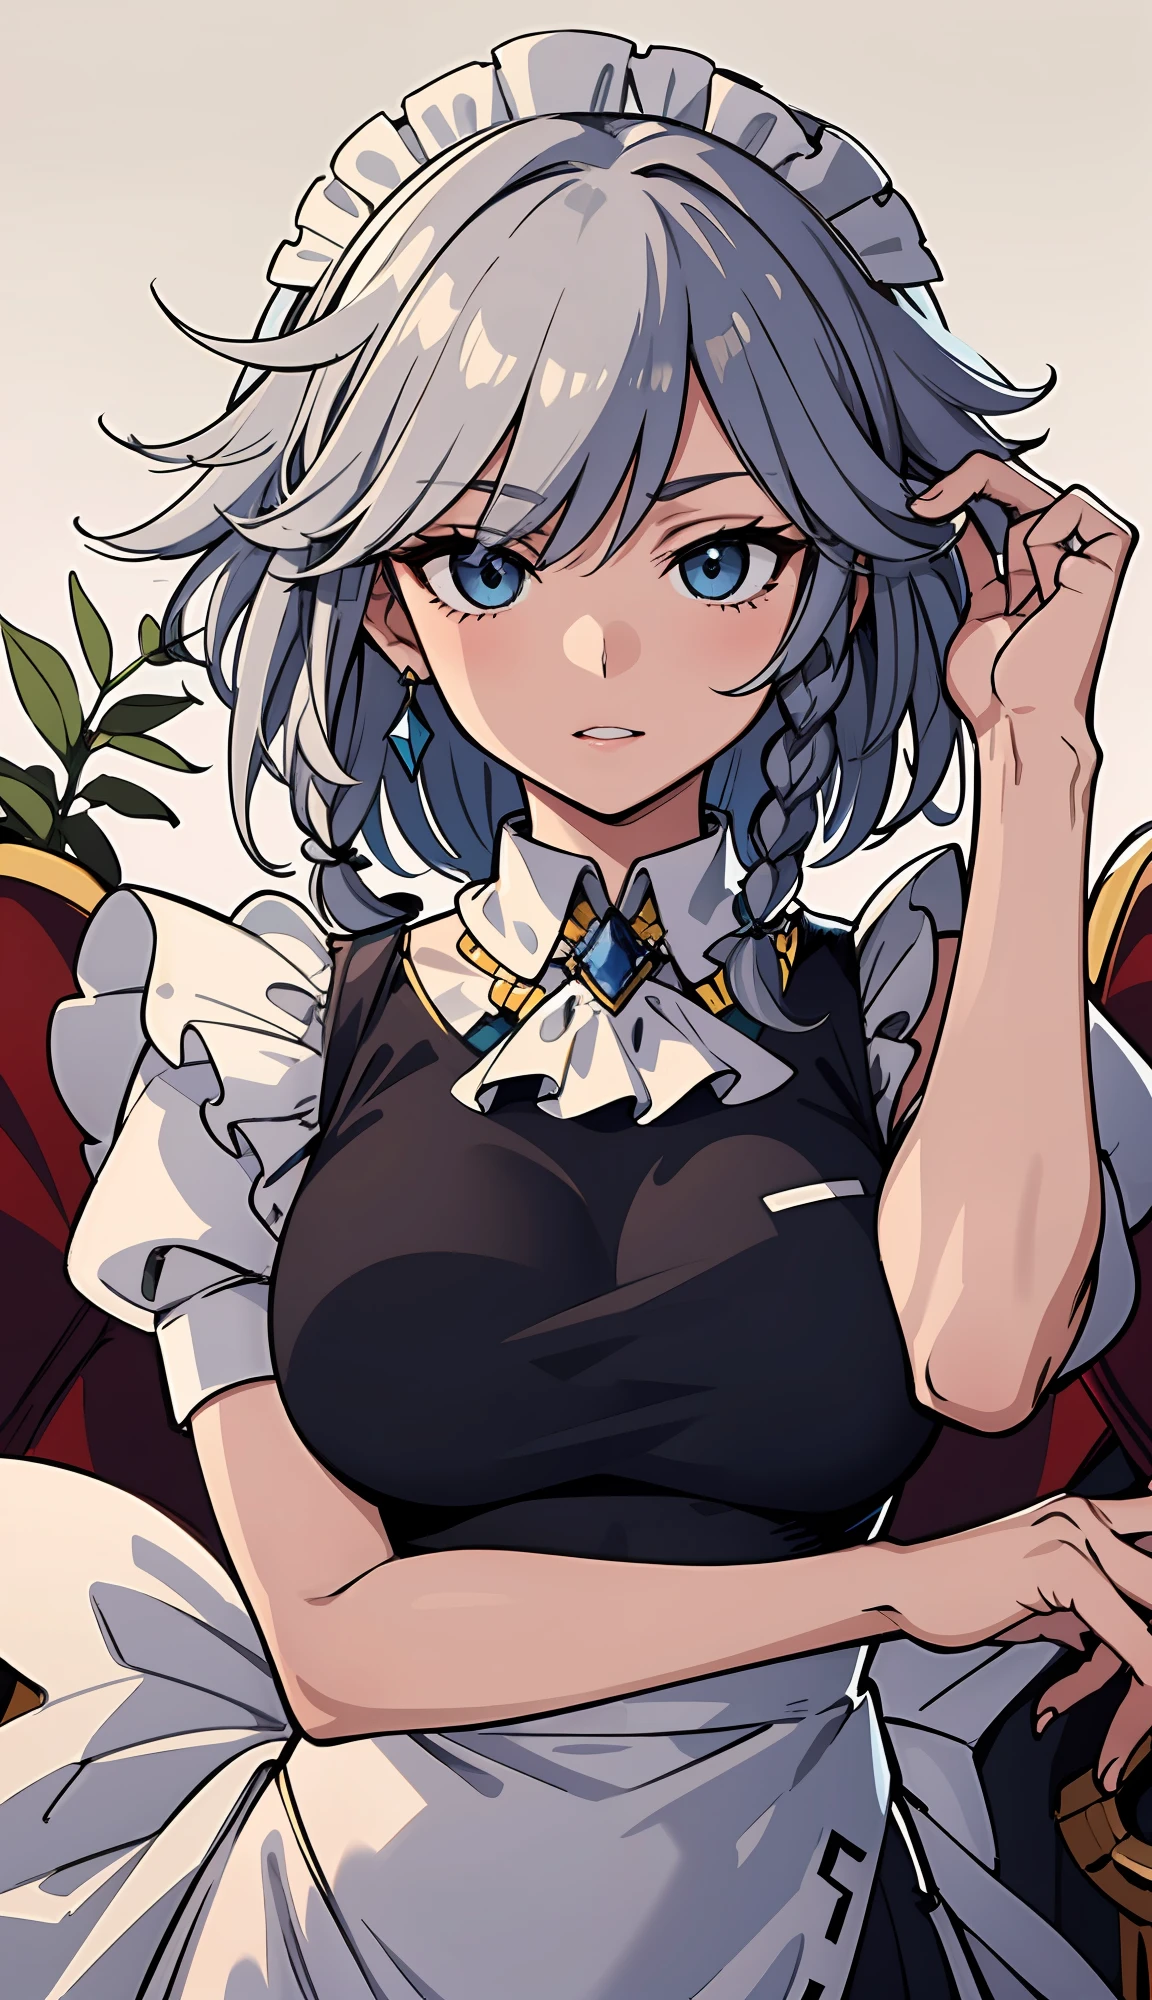 (Sakuya Izayoi), silver hair, blue eyes, (Masterpiece : 1,8), k quality, final fantasy artwork concept, detailed manga eyes, detailed hair, detailed clothes, detailed body, cleaner designs, detailed face pronounced, shiny objects like jewels, see creases on clothes, more coherent clothing, more rounded eyes transparent liquid globular, more colors, more coherent clothing , correct the features of the clothes, better eyes contour, better shoulders, really colorful, coarser line, black line, finishing . (coarser line) (black line) (homogeneous rendering: 1.3)